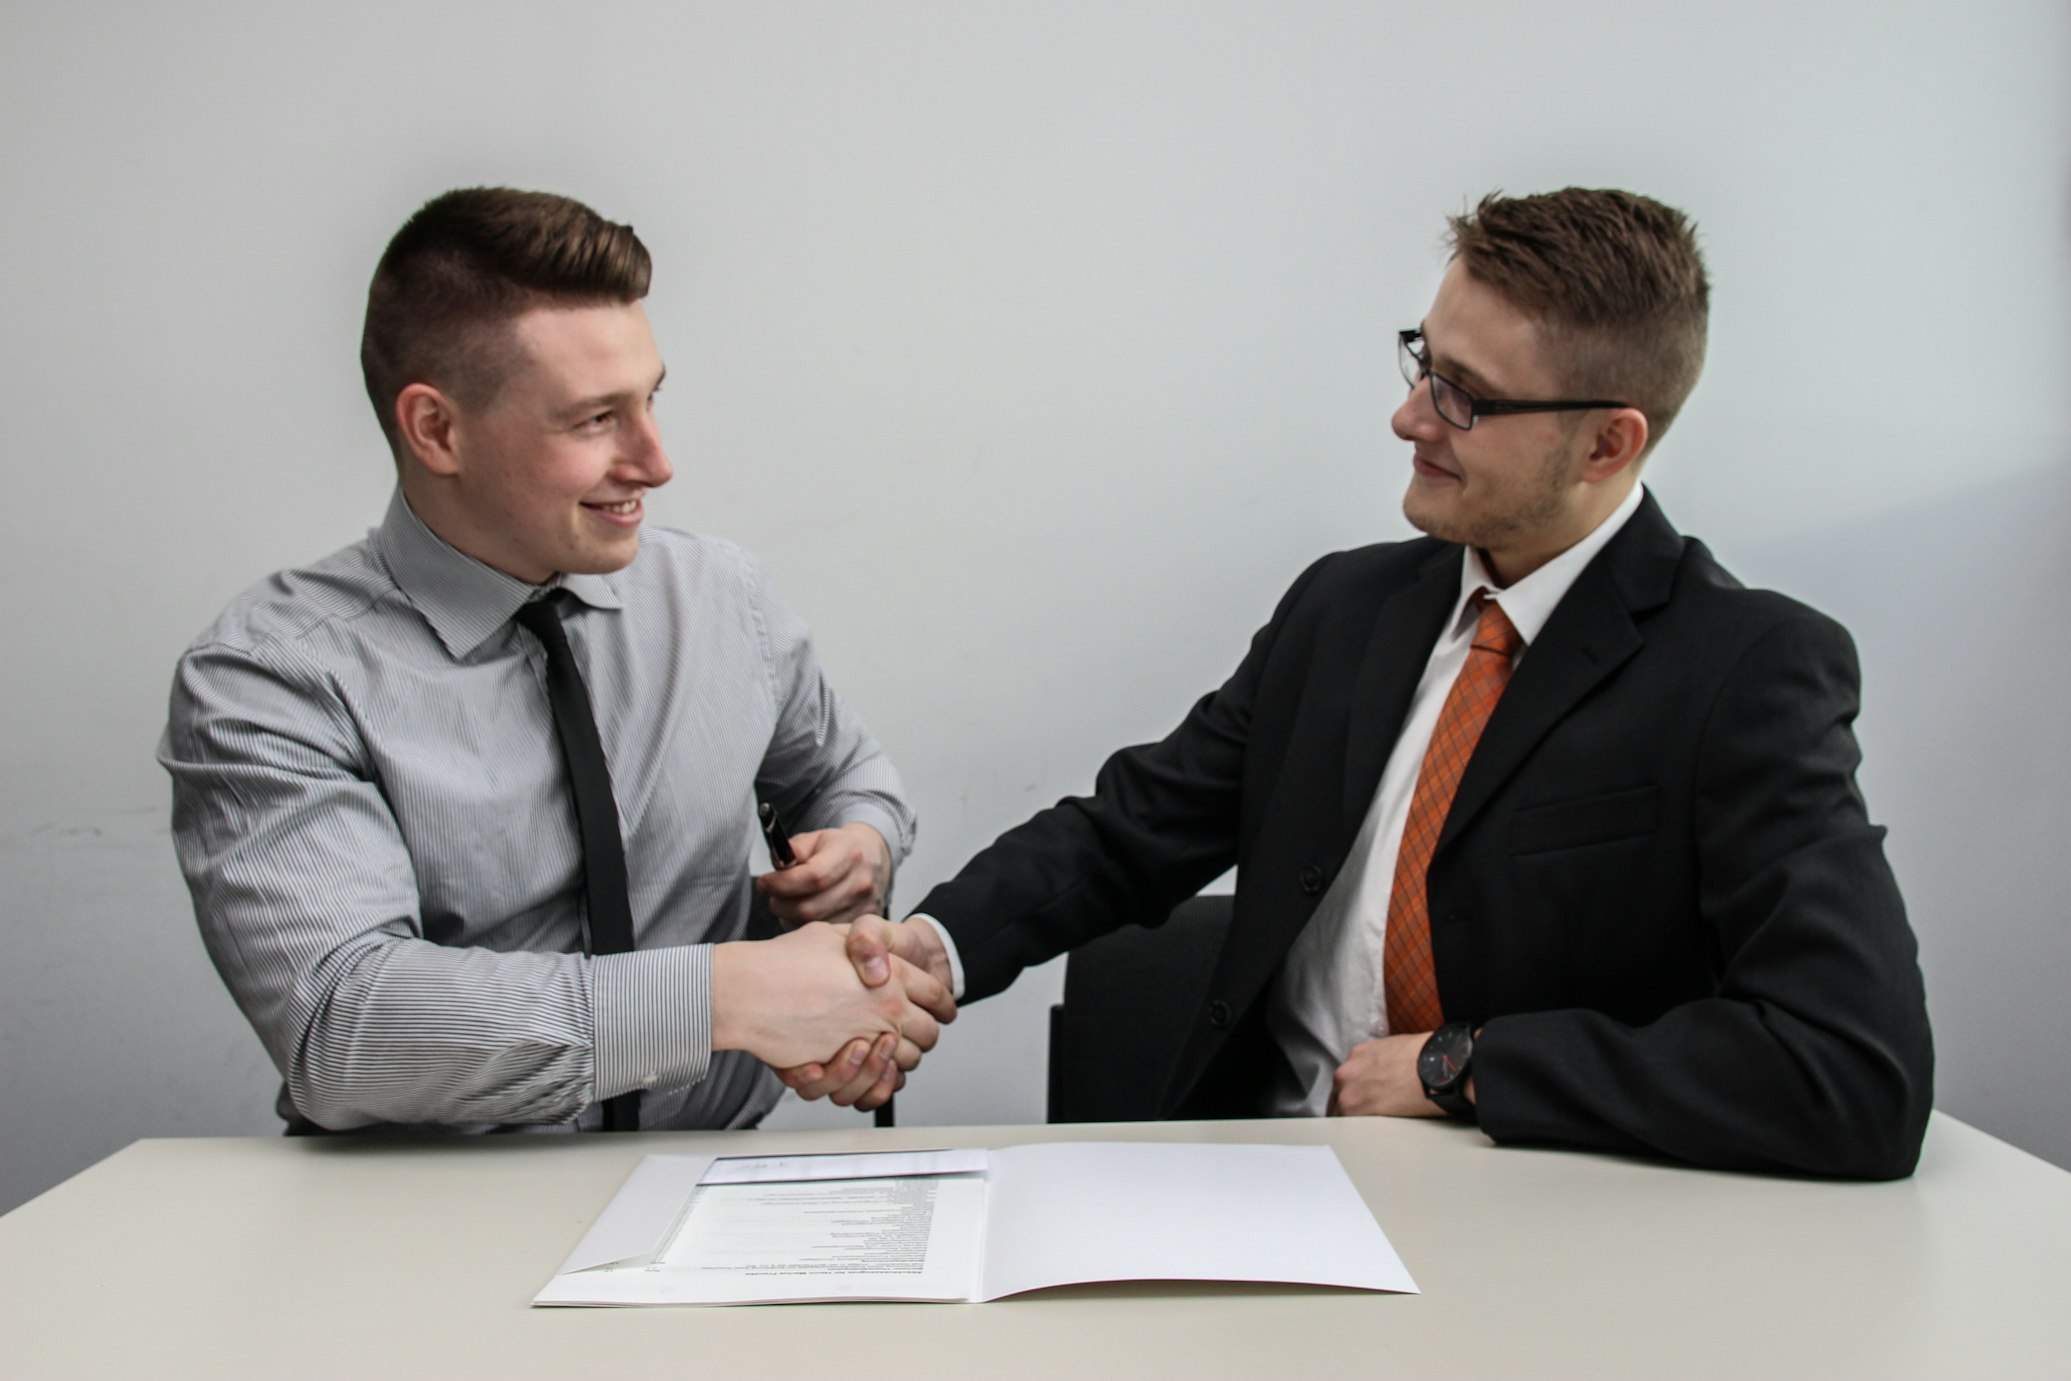 Two men shaking hands over a contract